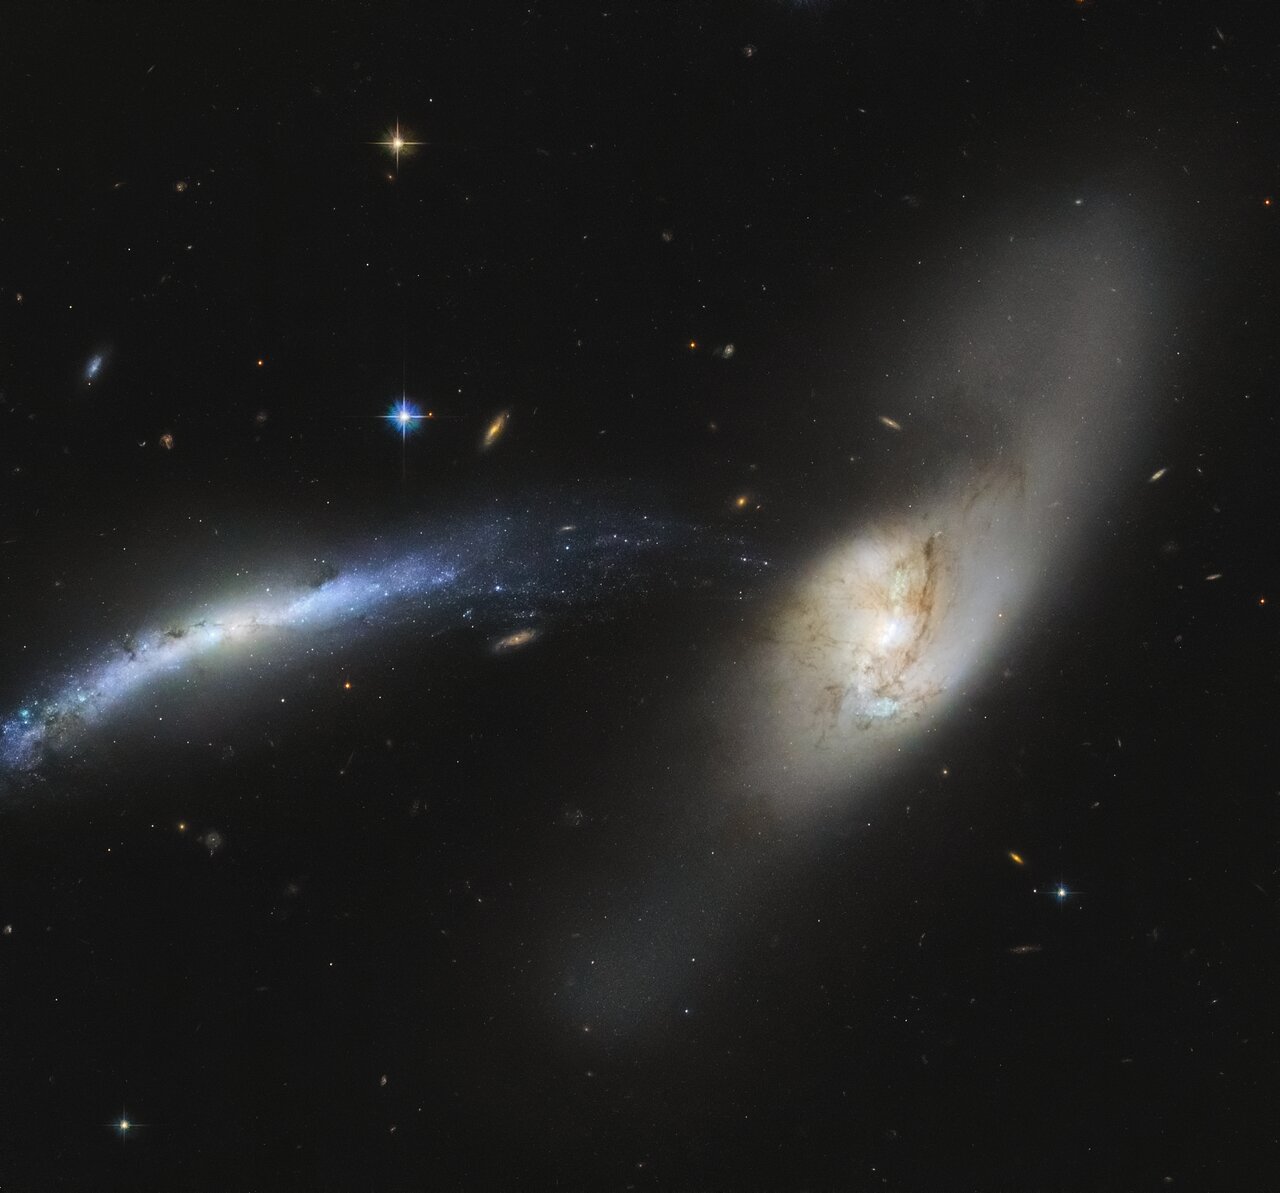 Galactic mergers can take hundreds of millions to a billion years to complete and form a single irregular entity